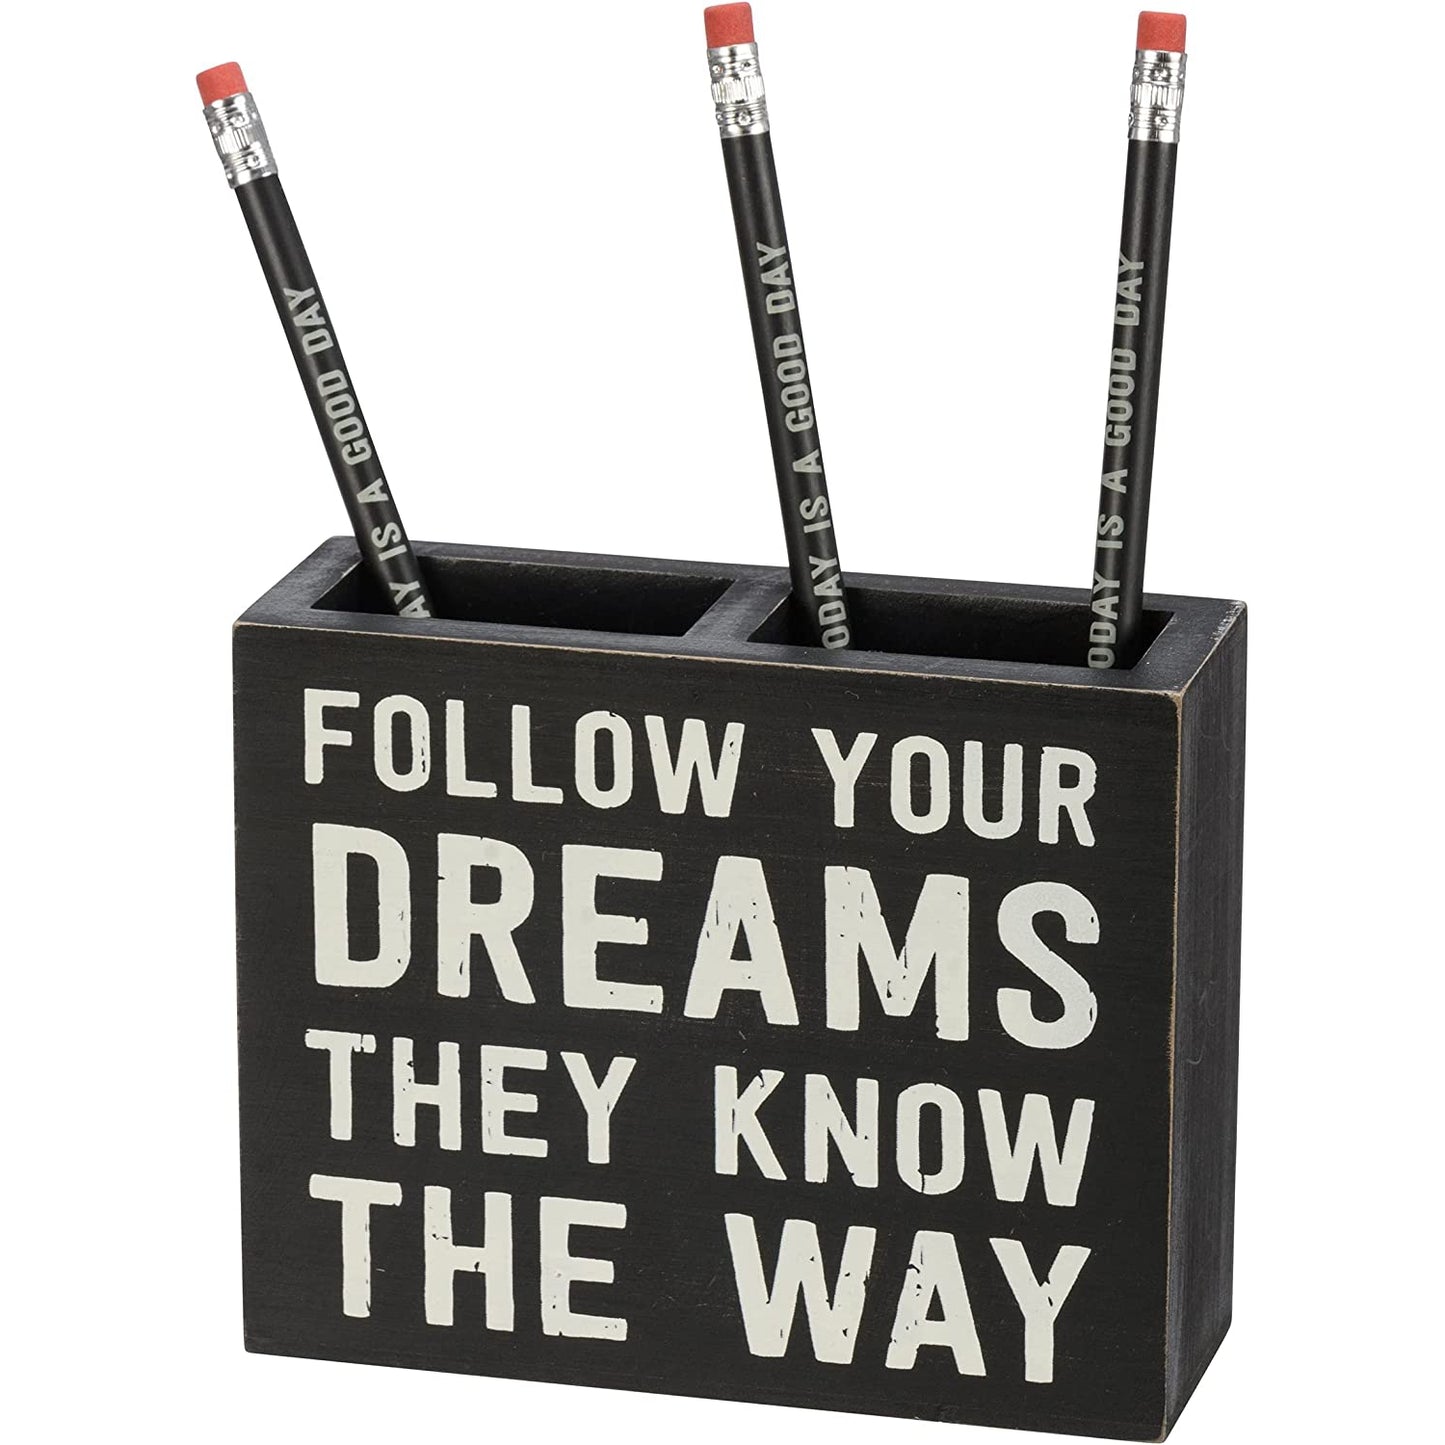 Follow Your Dreams Stationery Set | Giftable | Notebooks, Pencils, Pen Holder